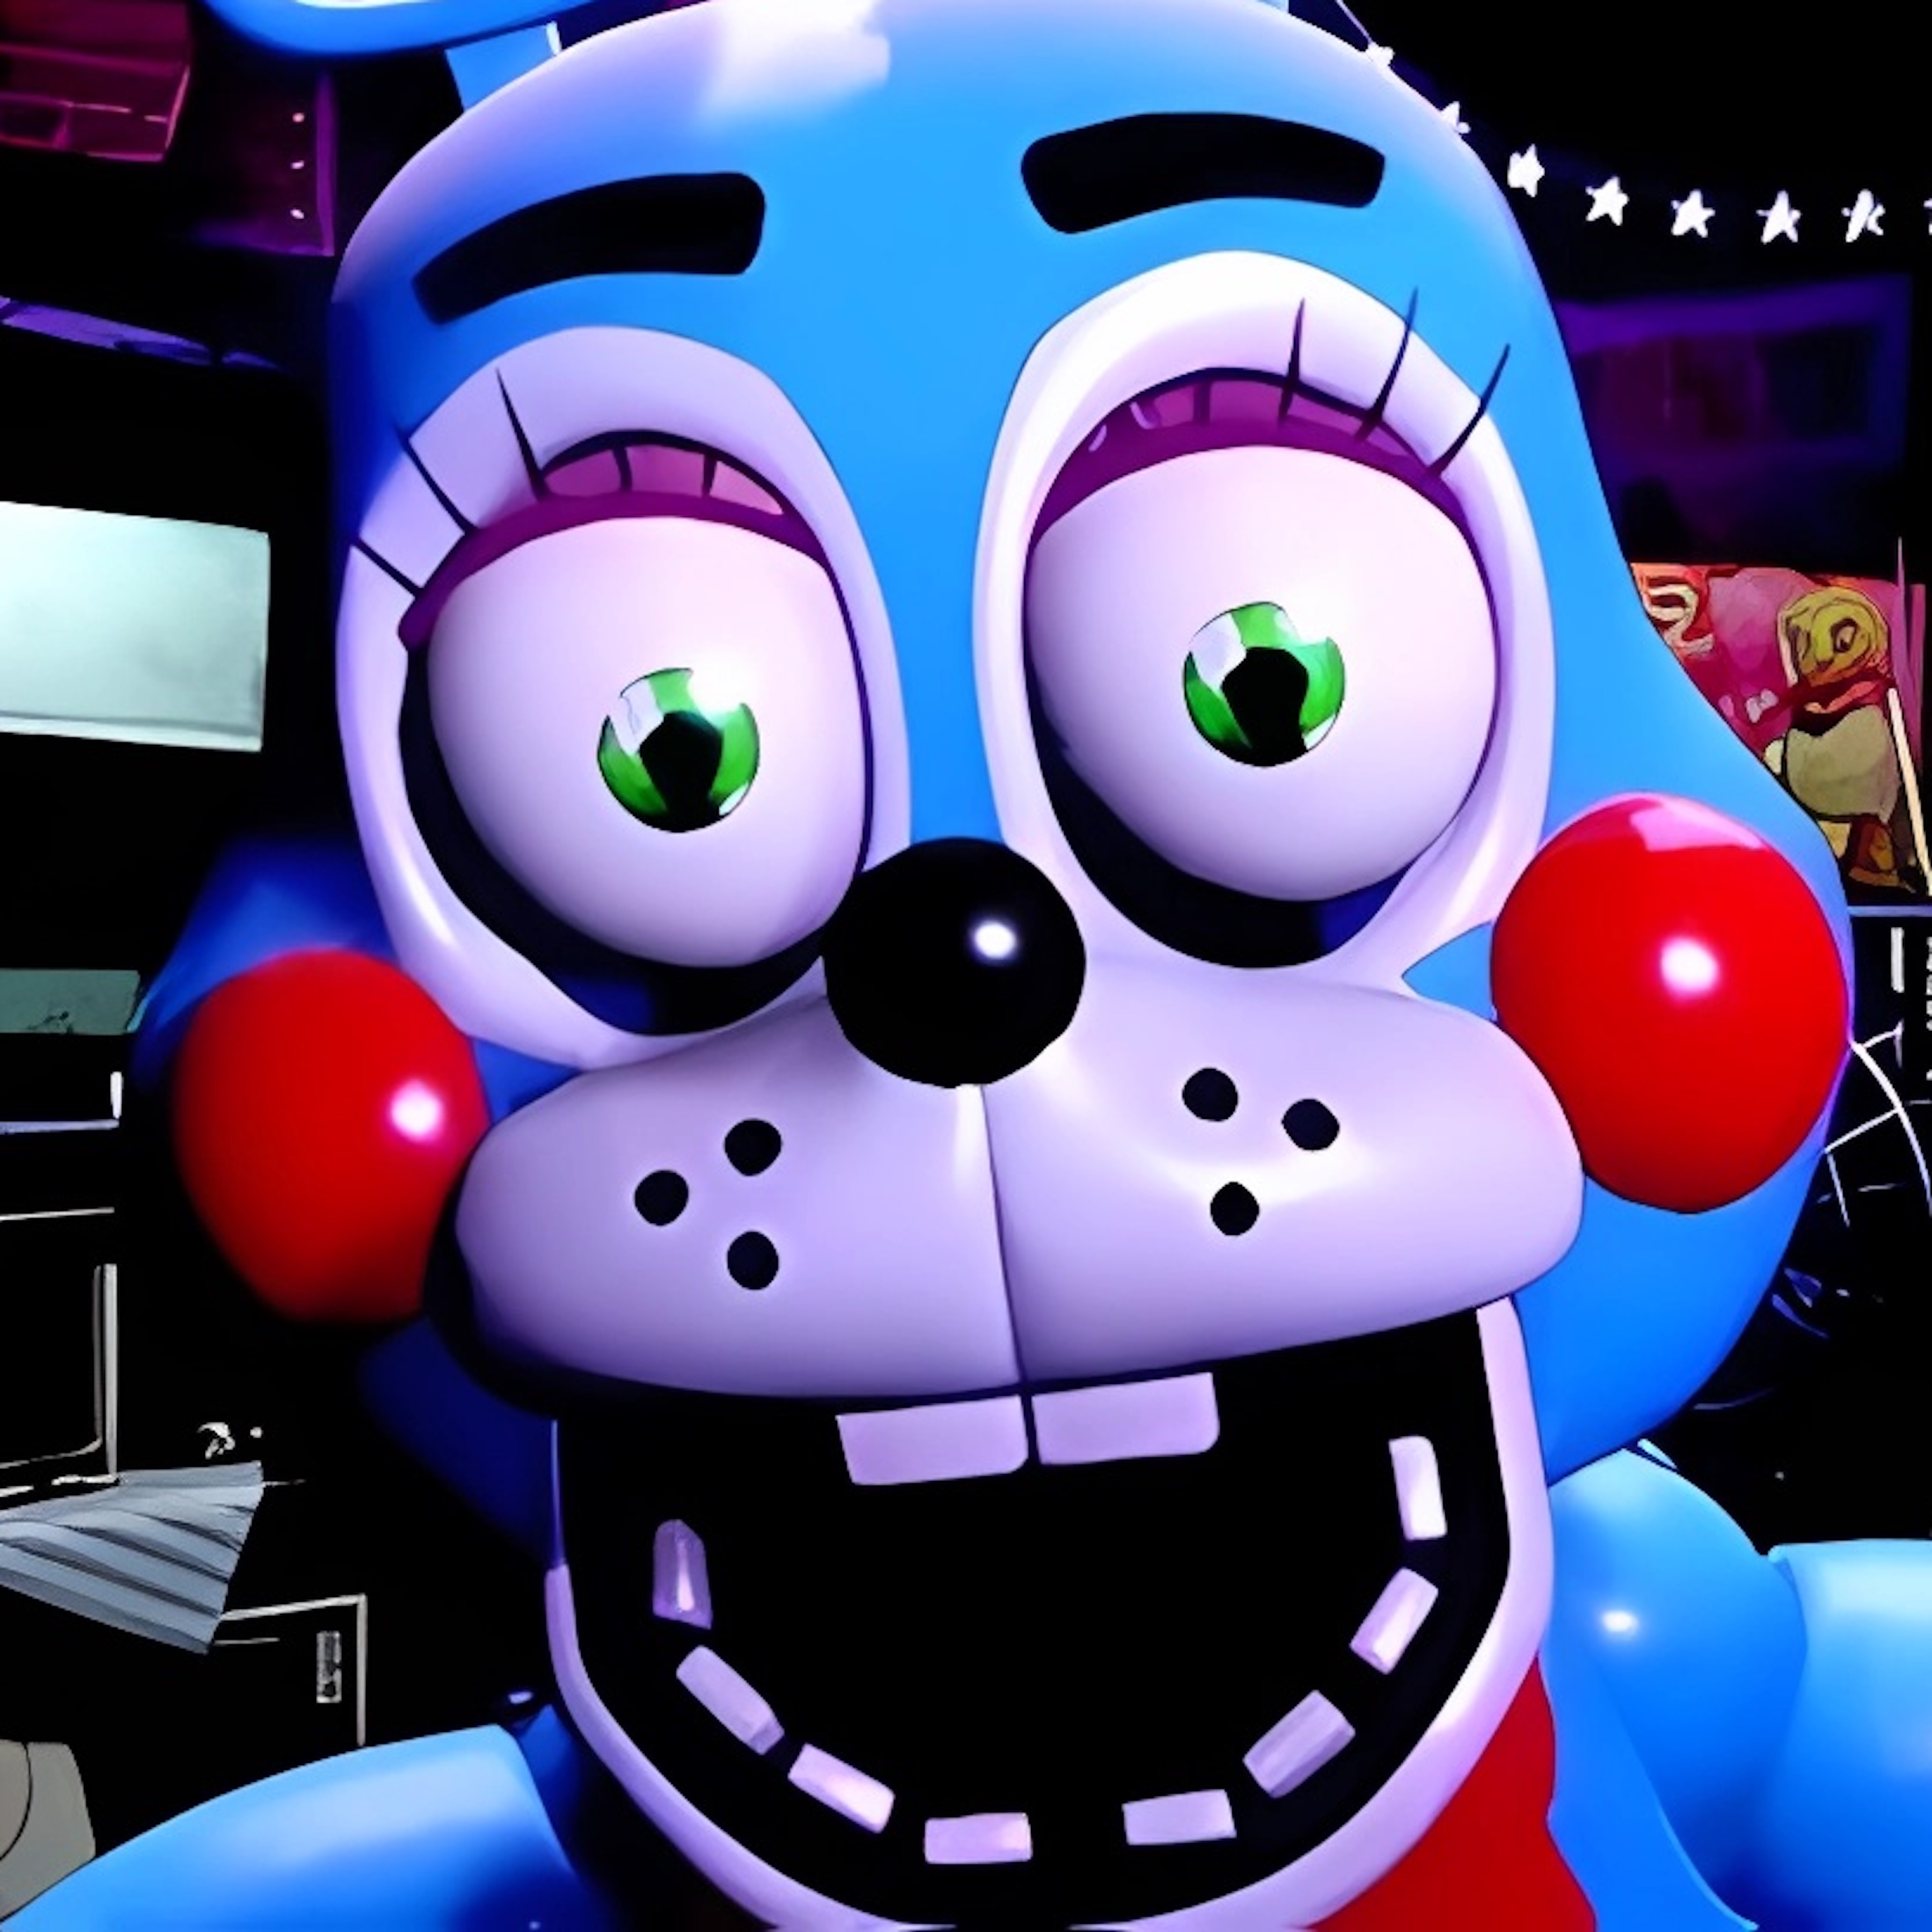 Five Nights at Freddy's 2 Remaster